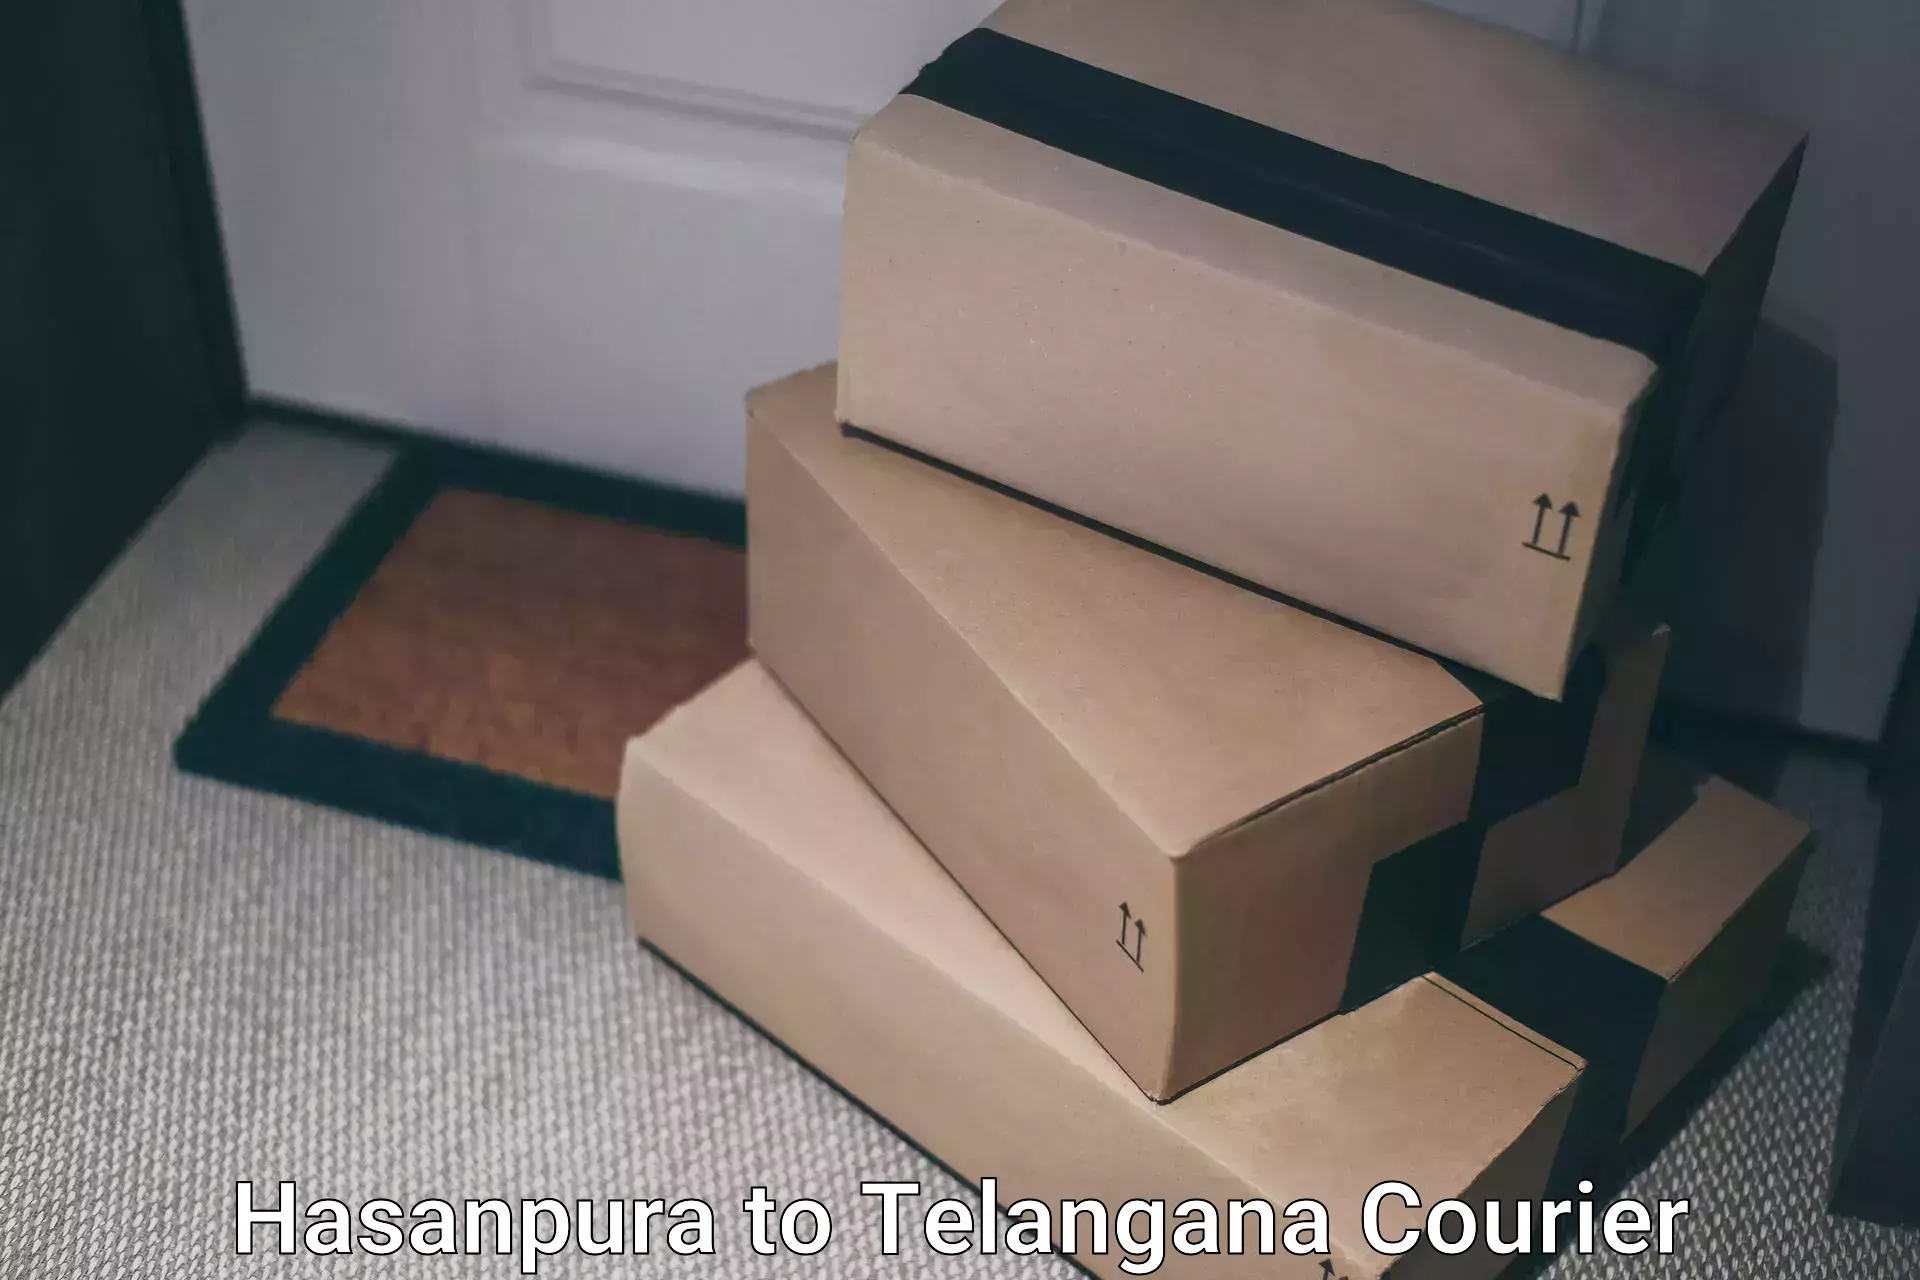 Nationwide shipping coverage Hasanpura to Medchal